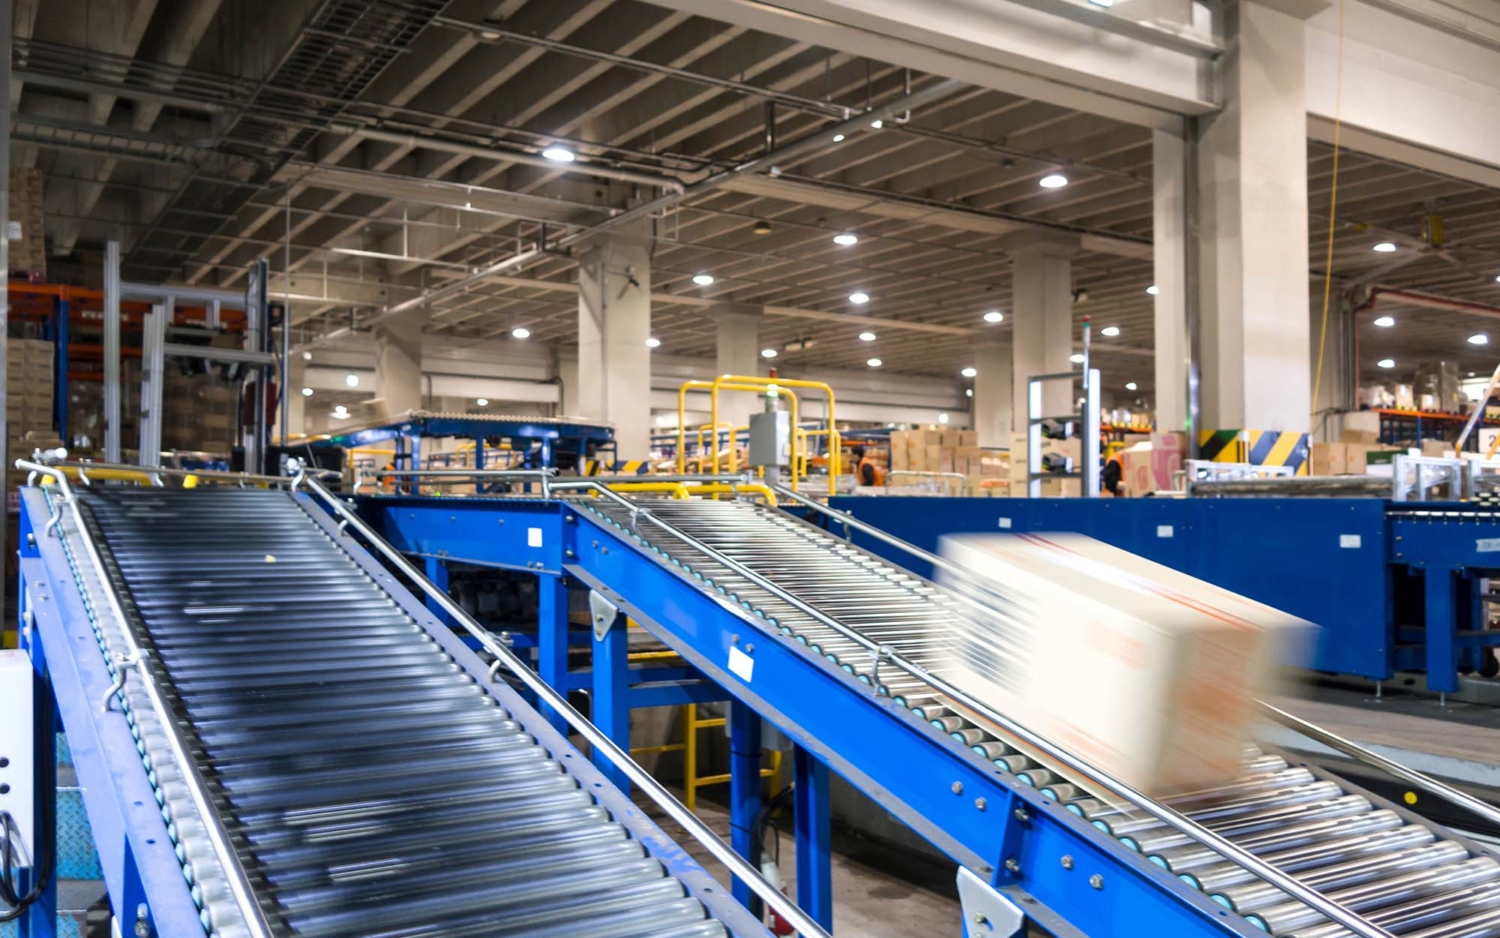 Automated Conveyor Belt in Warehouse